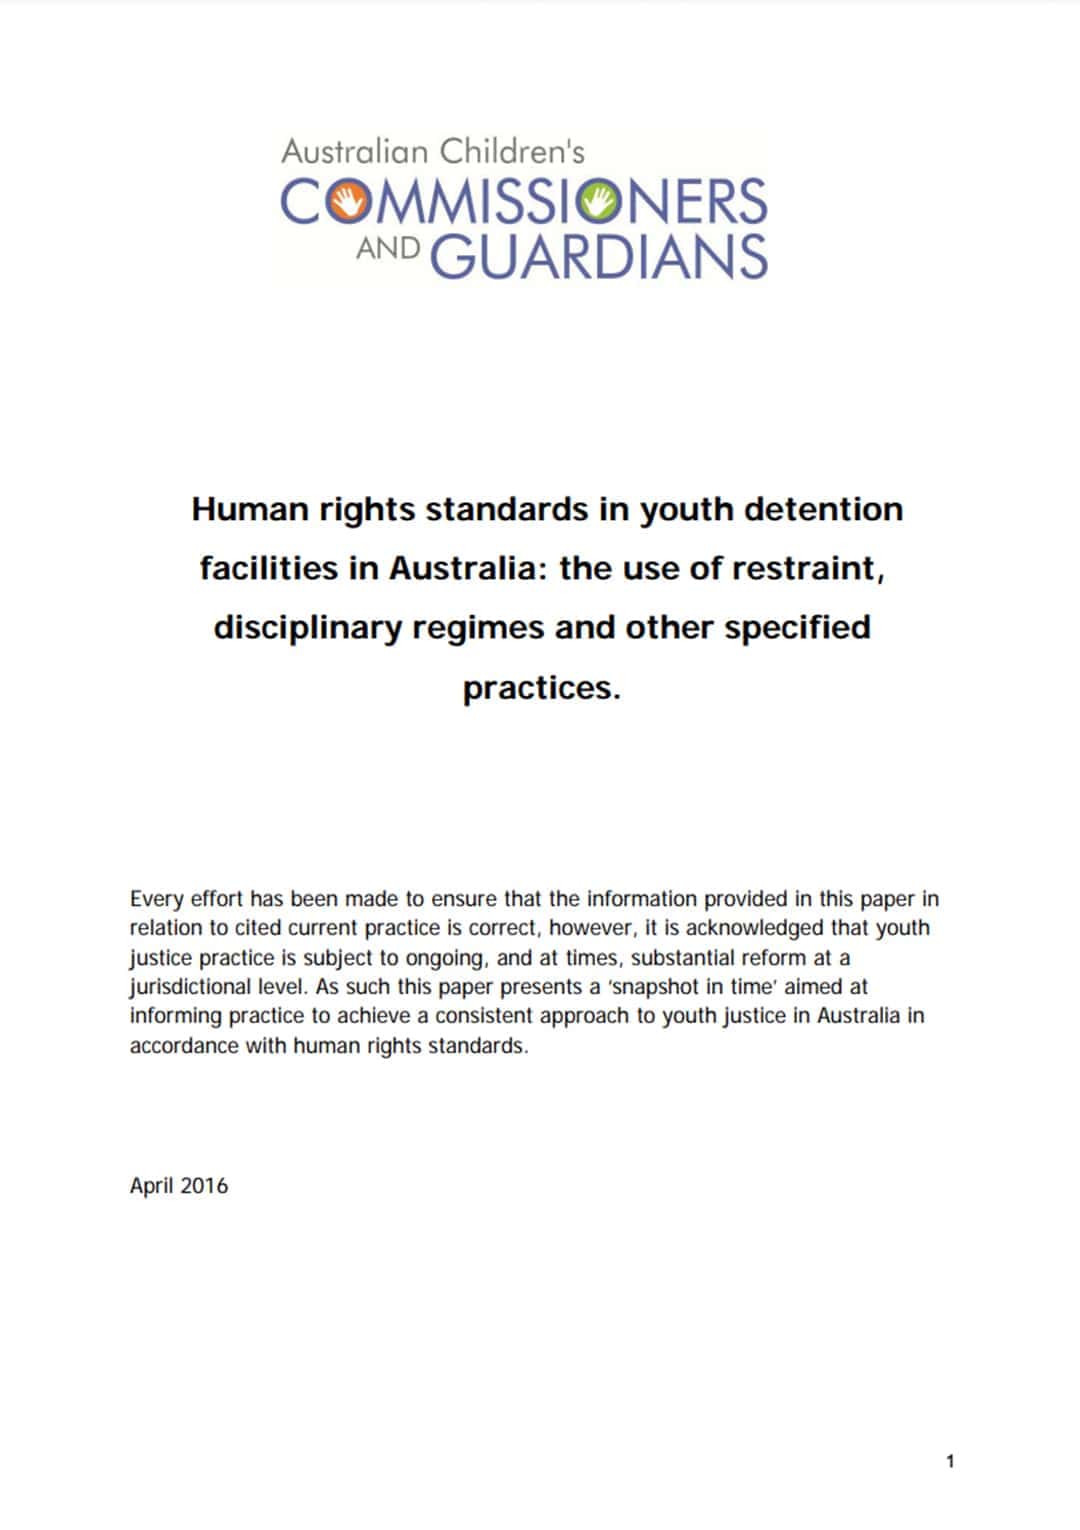 Human Rights Standards in Youth Detention Facilities in Australia